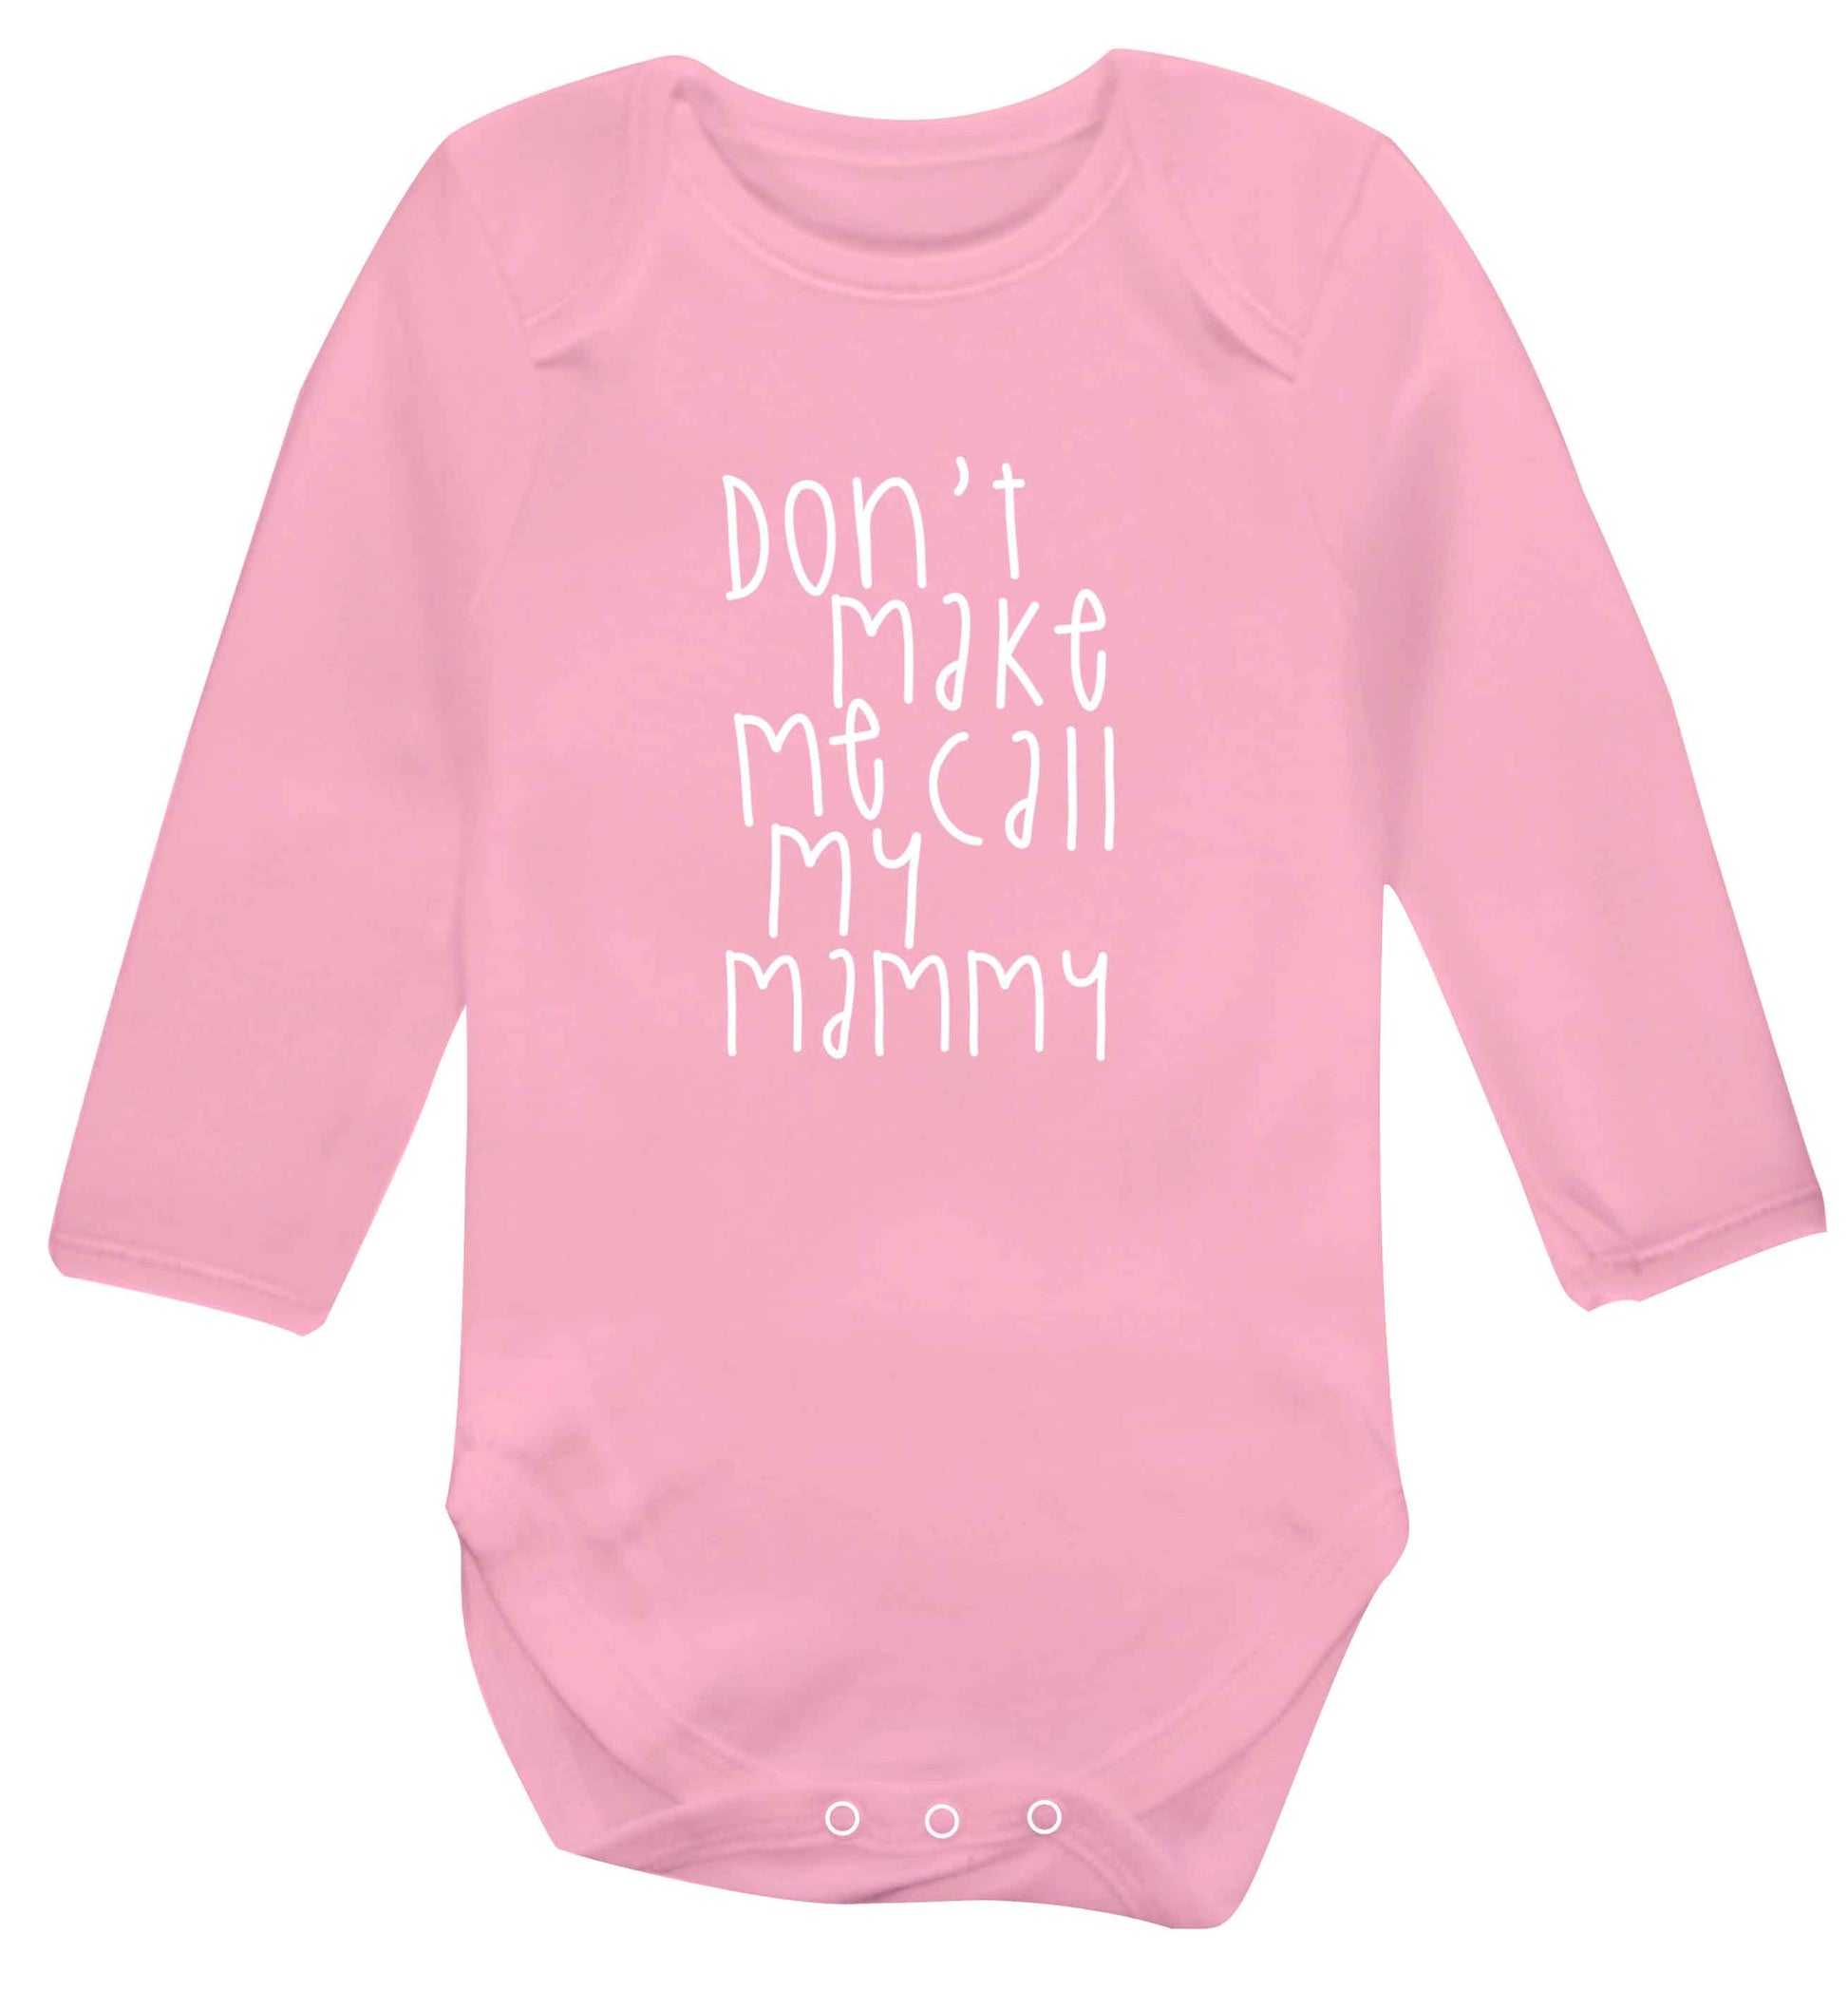 Don't make me call my mammy baby vest long sleeved pale pink 6-12 months